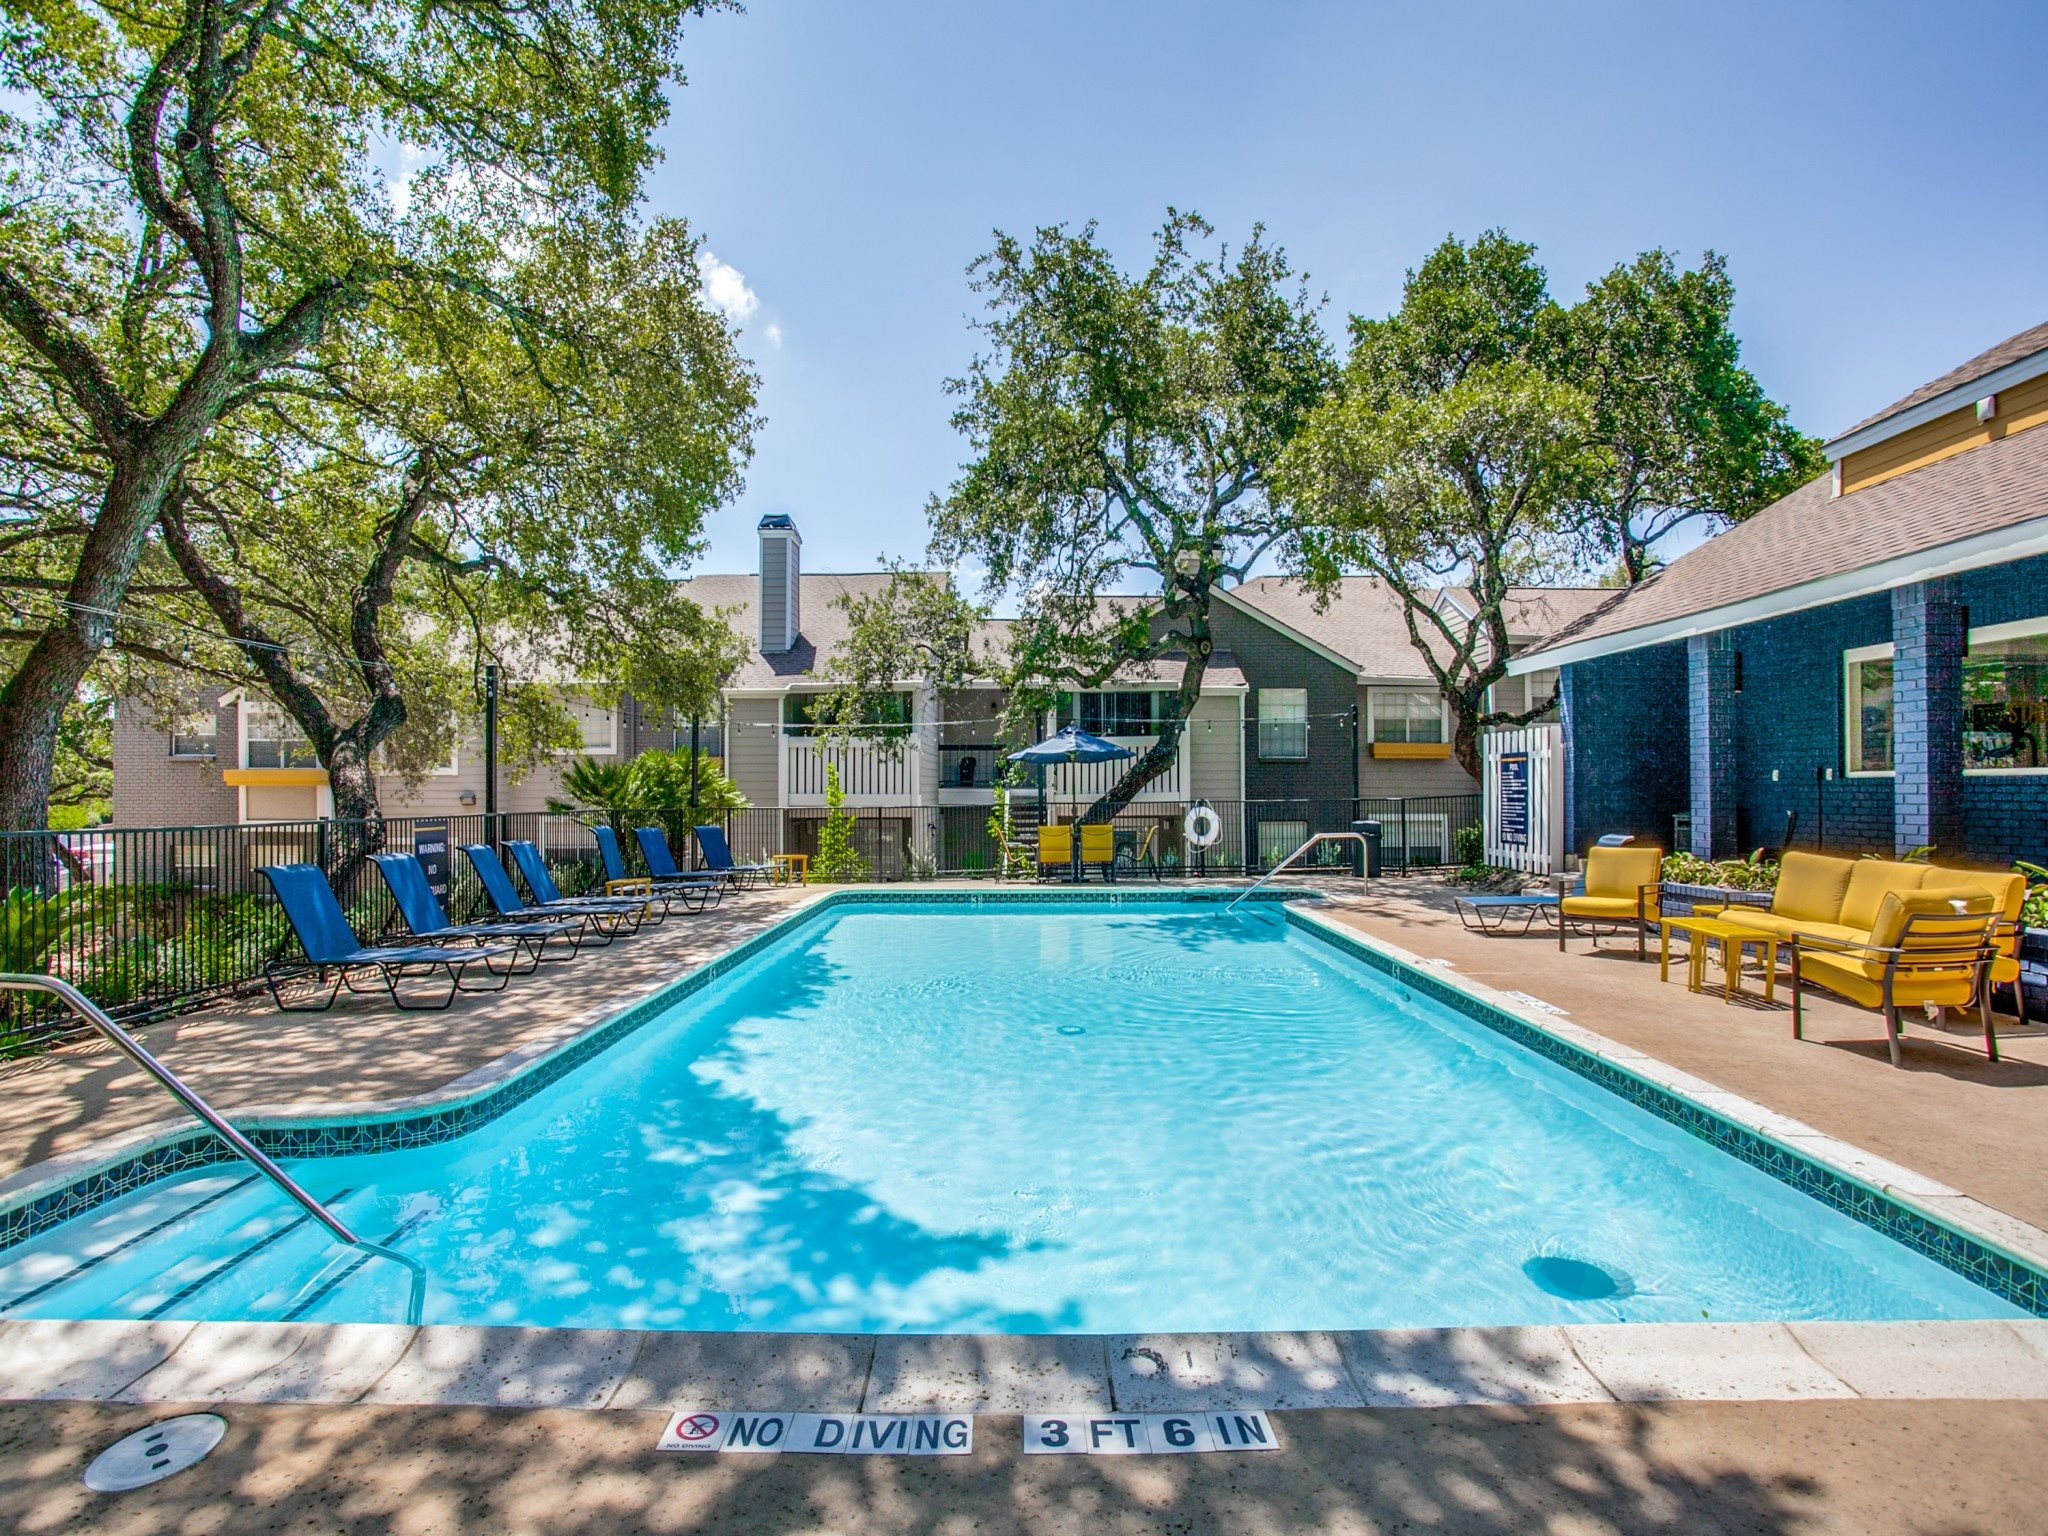 New Apartments In Huebner Oaks with Simple Decor